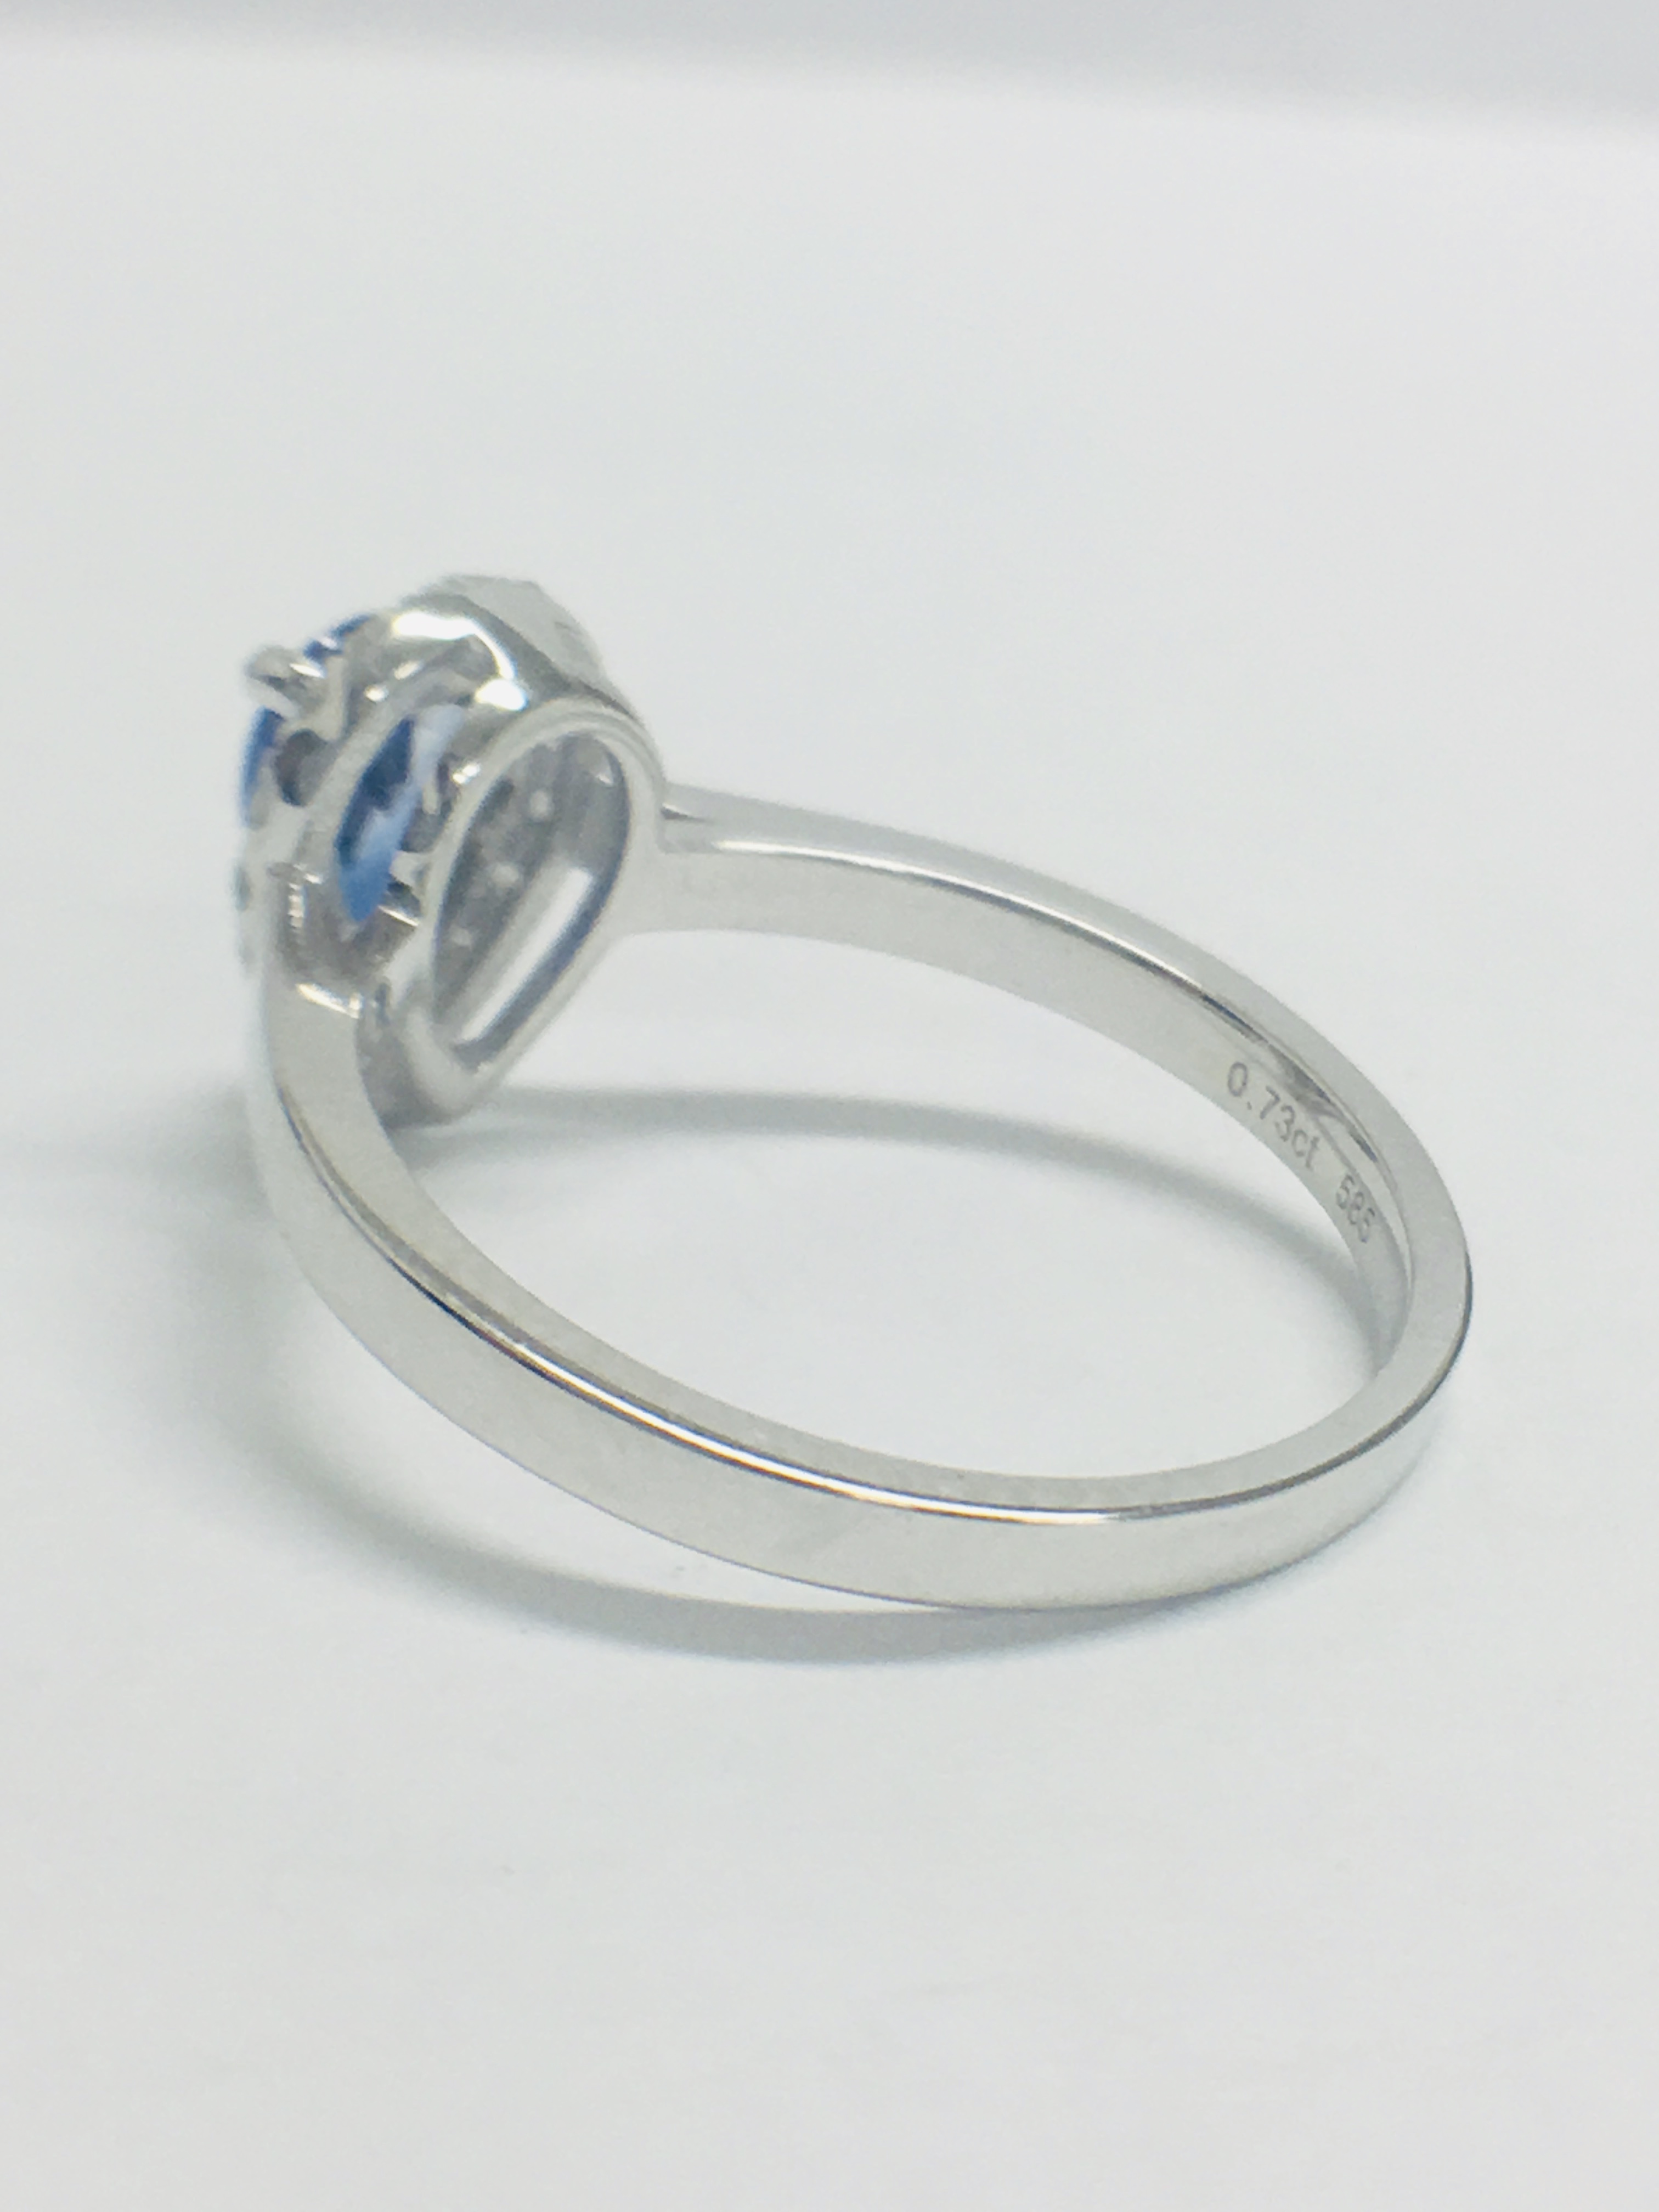 14Ct White Gold Sapphire And Diamond Ring. - Image 4 of 10